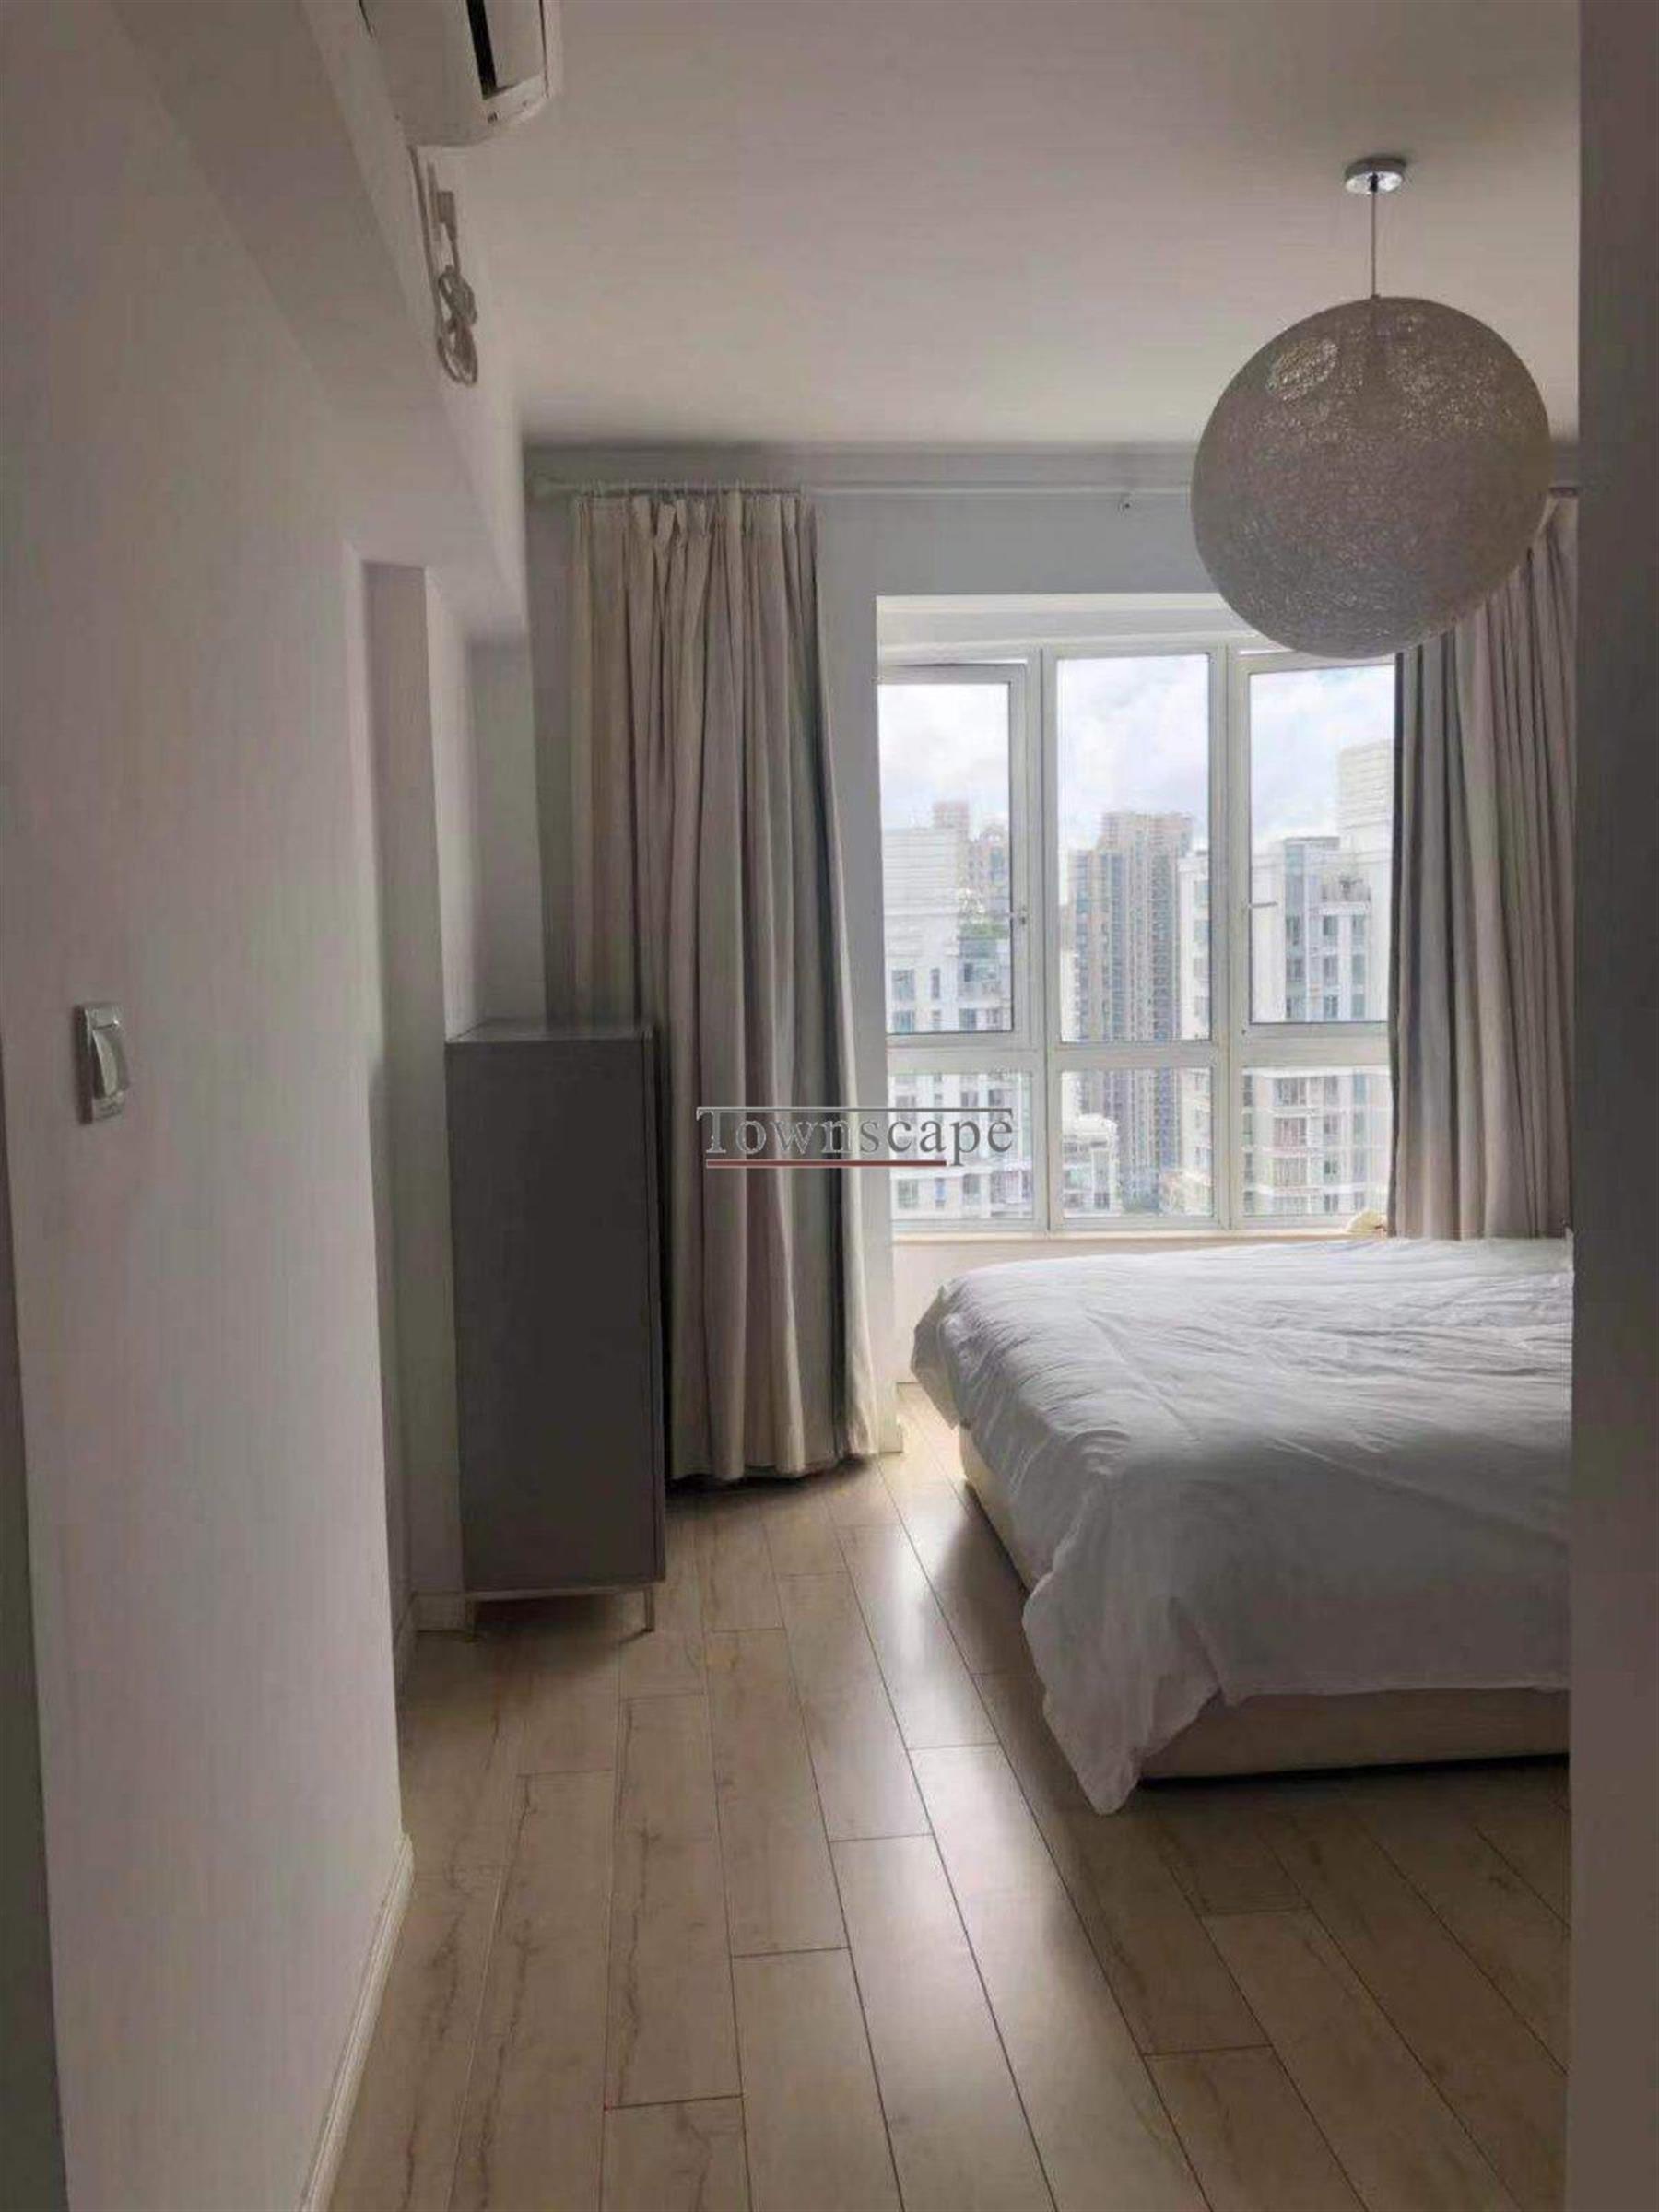 Bright Rooms Newly Renovated High Floor Apt w Great Views in Xujiahui La Cite for Rent